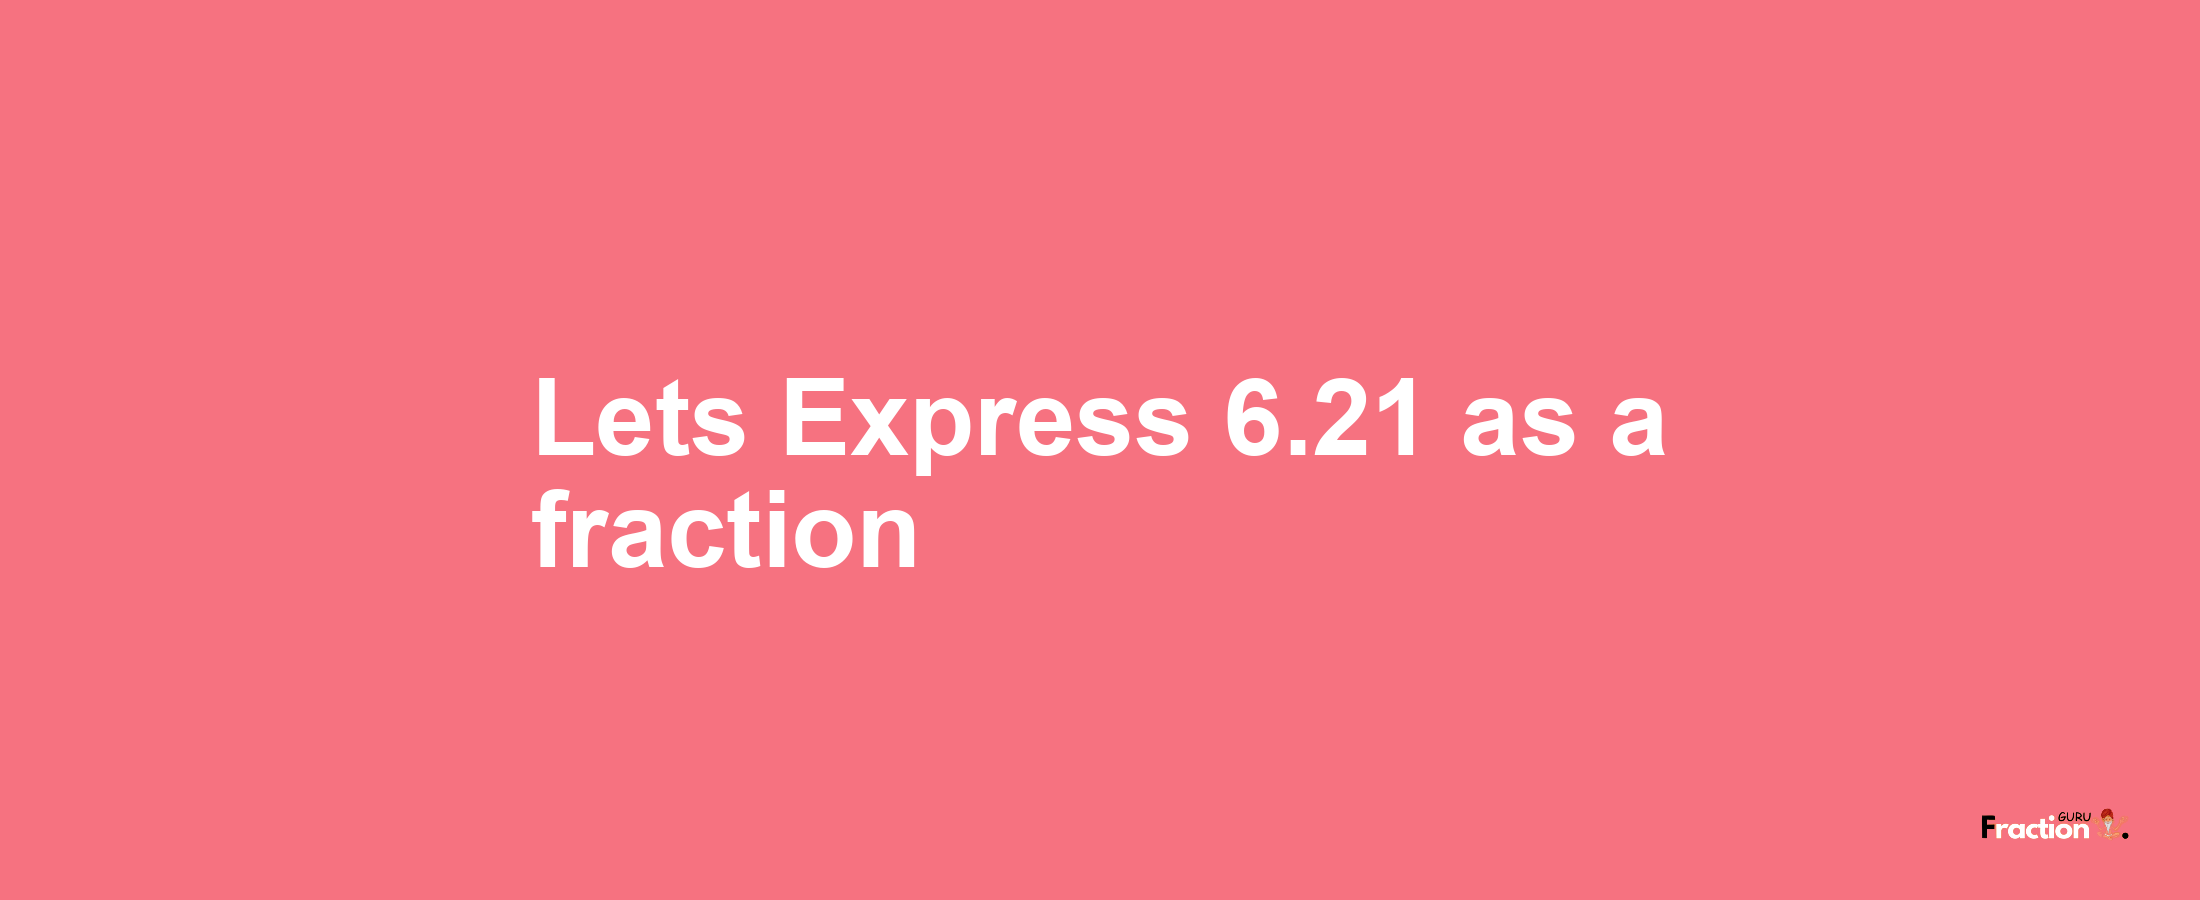 Lets Express 6.21 as afraction